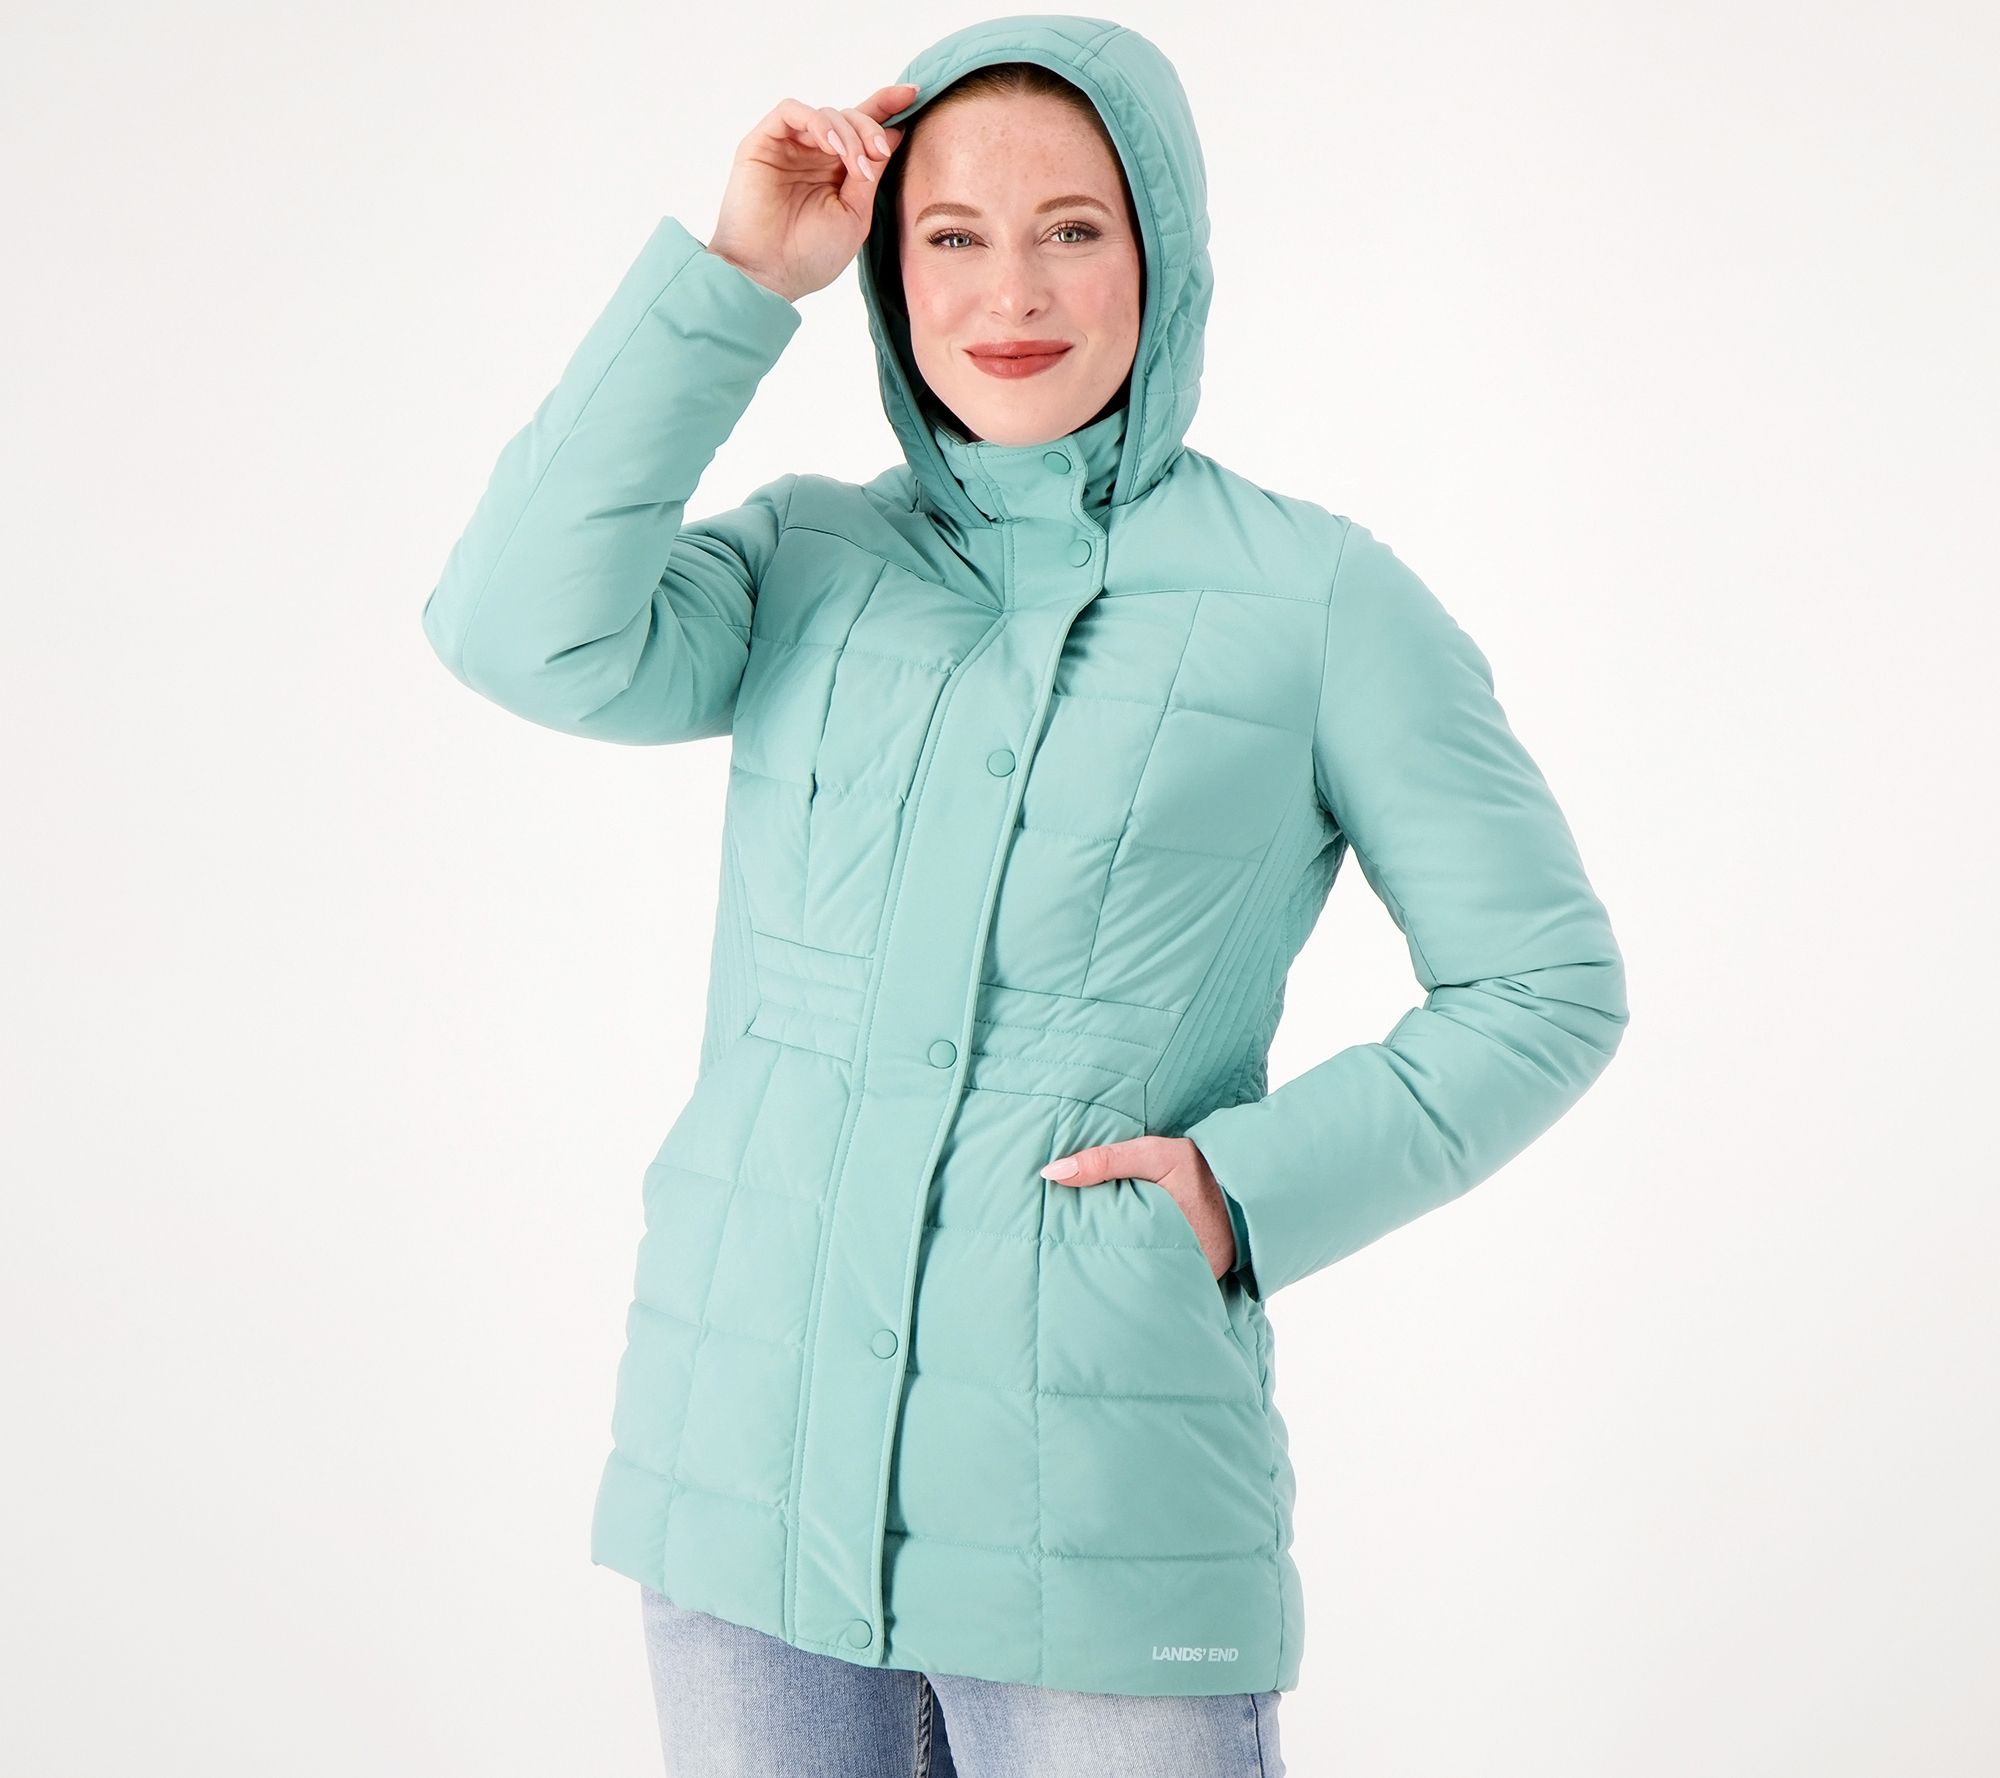 Outerwear Clearance 